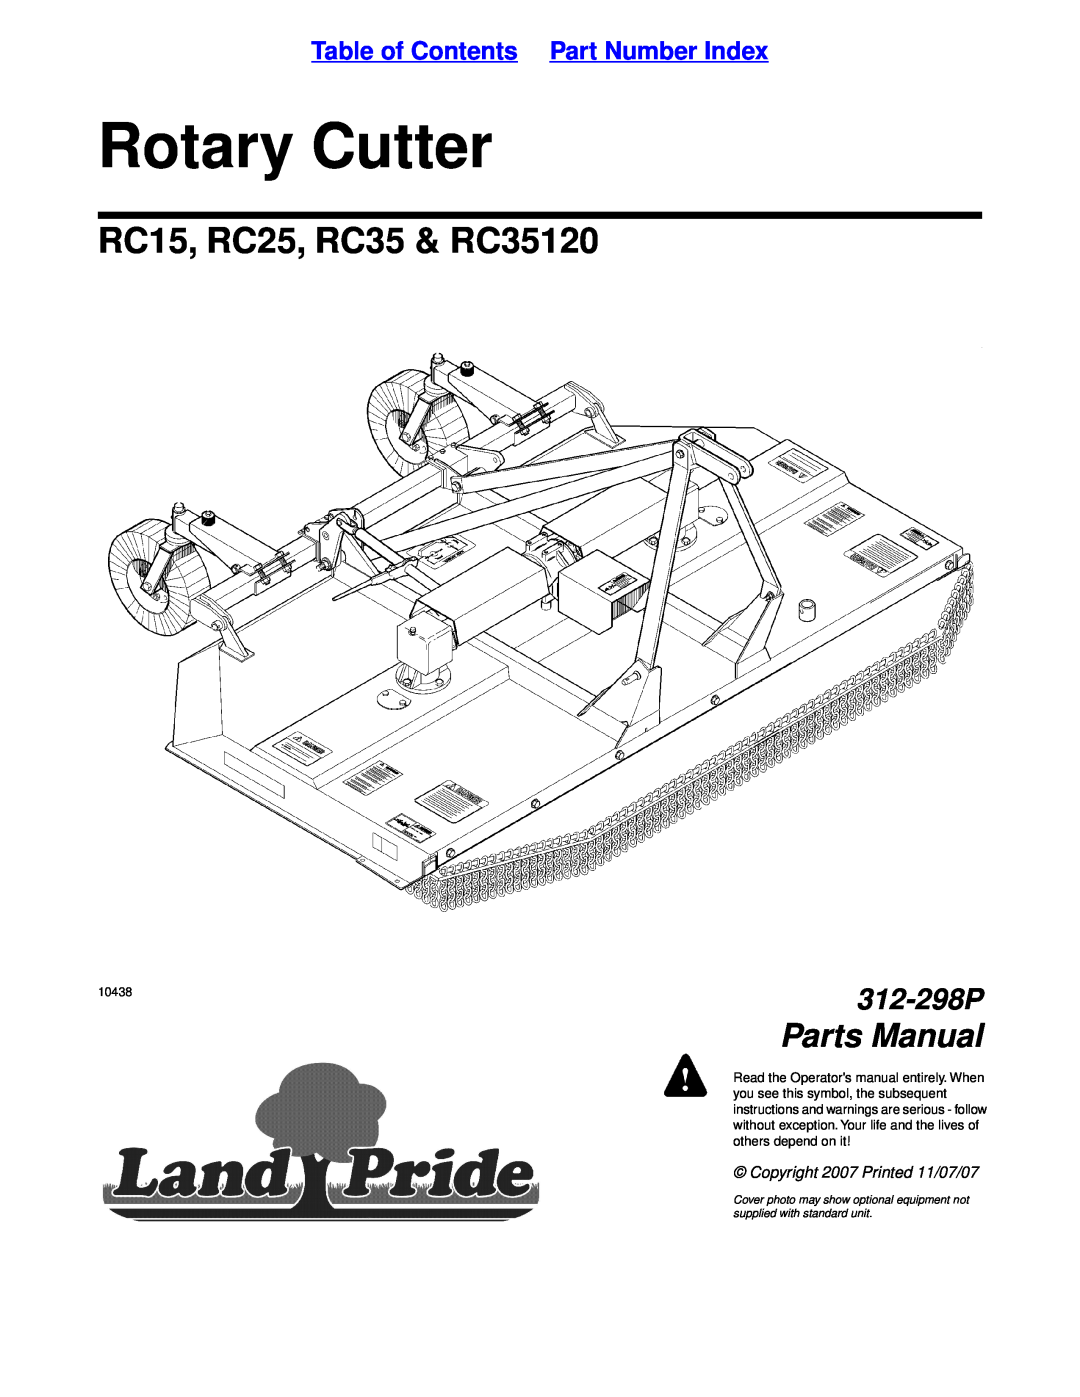 Land Pride RC25 manual Assembly Instructions, Check Chain Kit, Rotary Cutters, General Information, Before You Start 